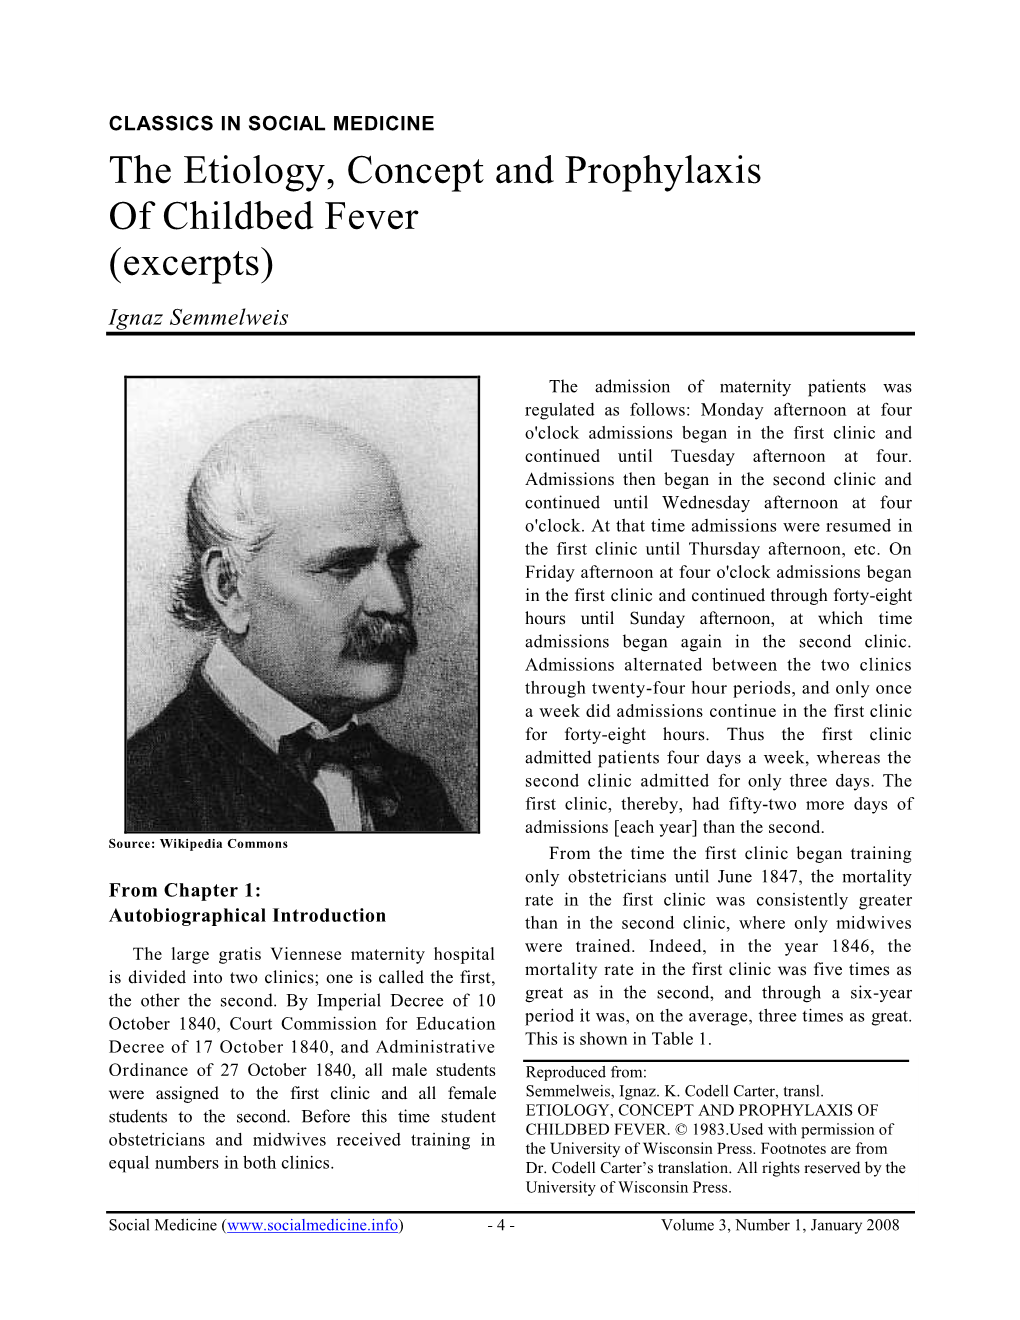 The Etiology, Concept and Prophylaxis of Childbed Fever (Excerpts) Ignaz Semmelweis